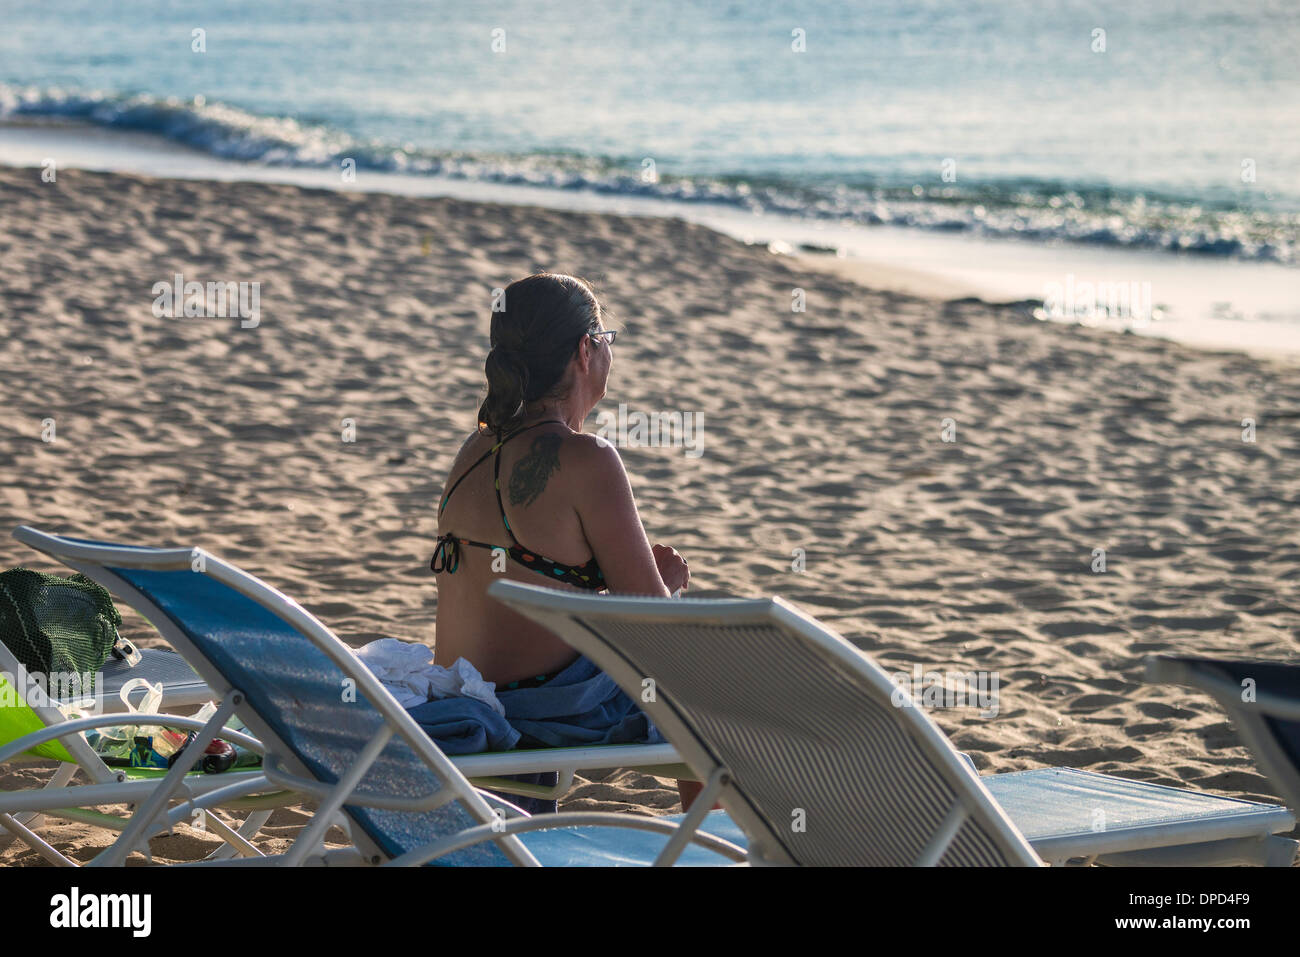 A woman in her early 40s sits on Sandcastle beach in her bathing suit and looks out to sea in St. Croix, U.S. Virgin Islands. Stock Photo